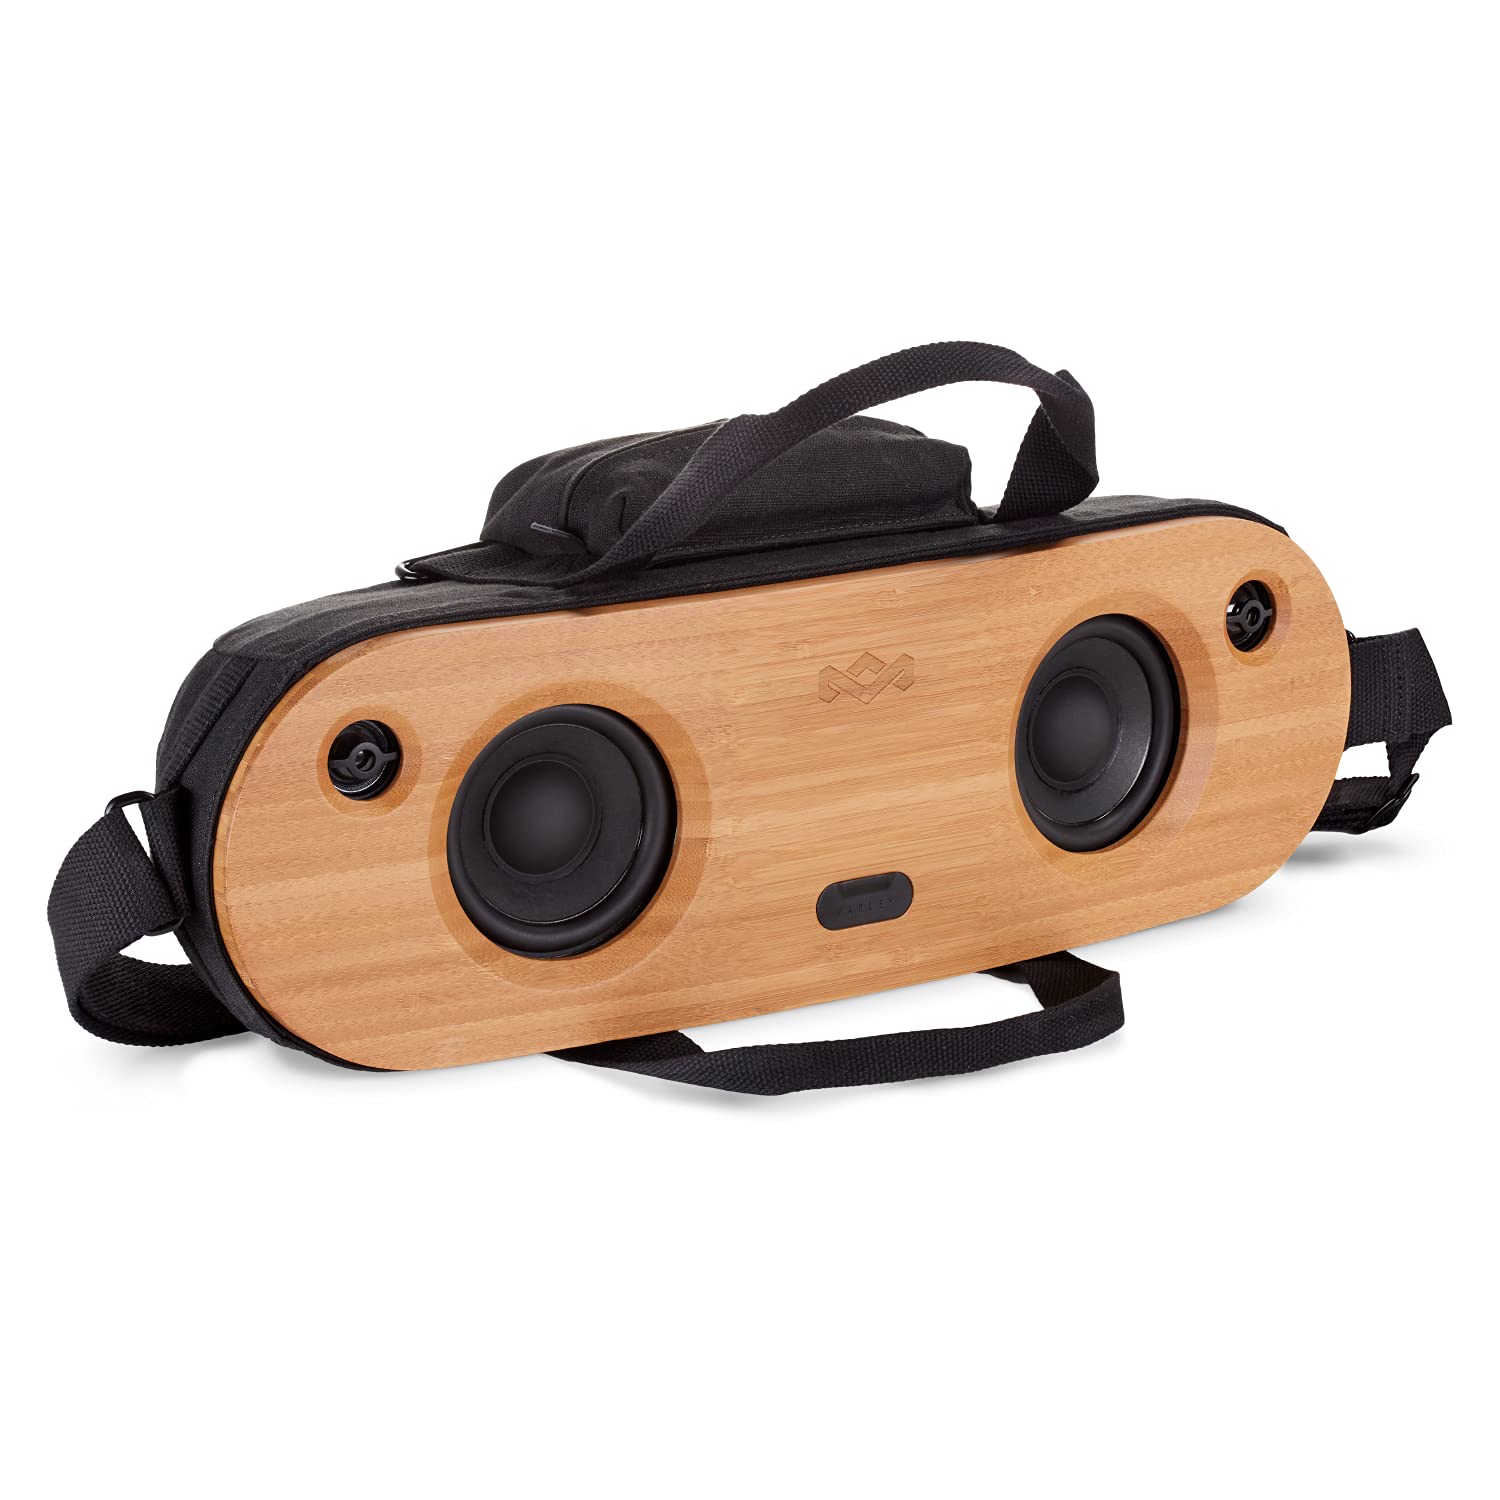 House of Marley Bag of Riddim 2: Portable Speaker with Wireless Bluetooth Connectivity, 10 Hours of Indoor/Outdoor Playtime, and Sustainable for $109.99